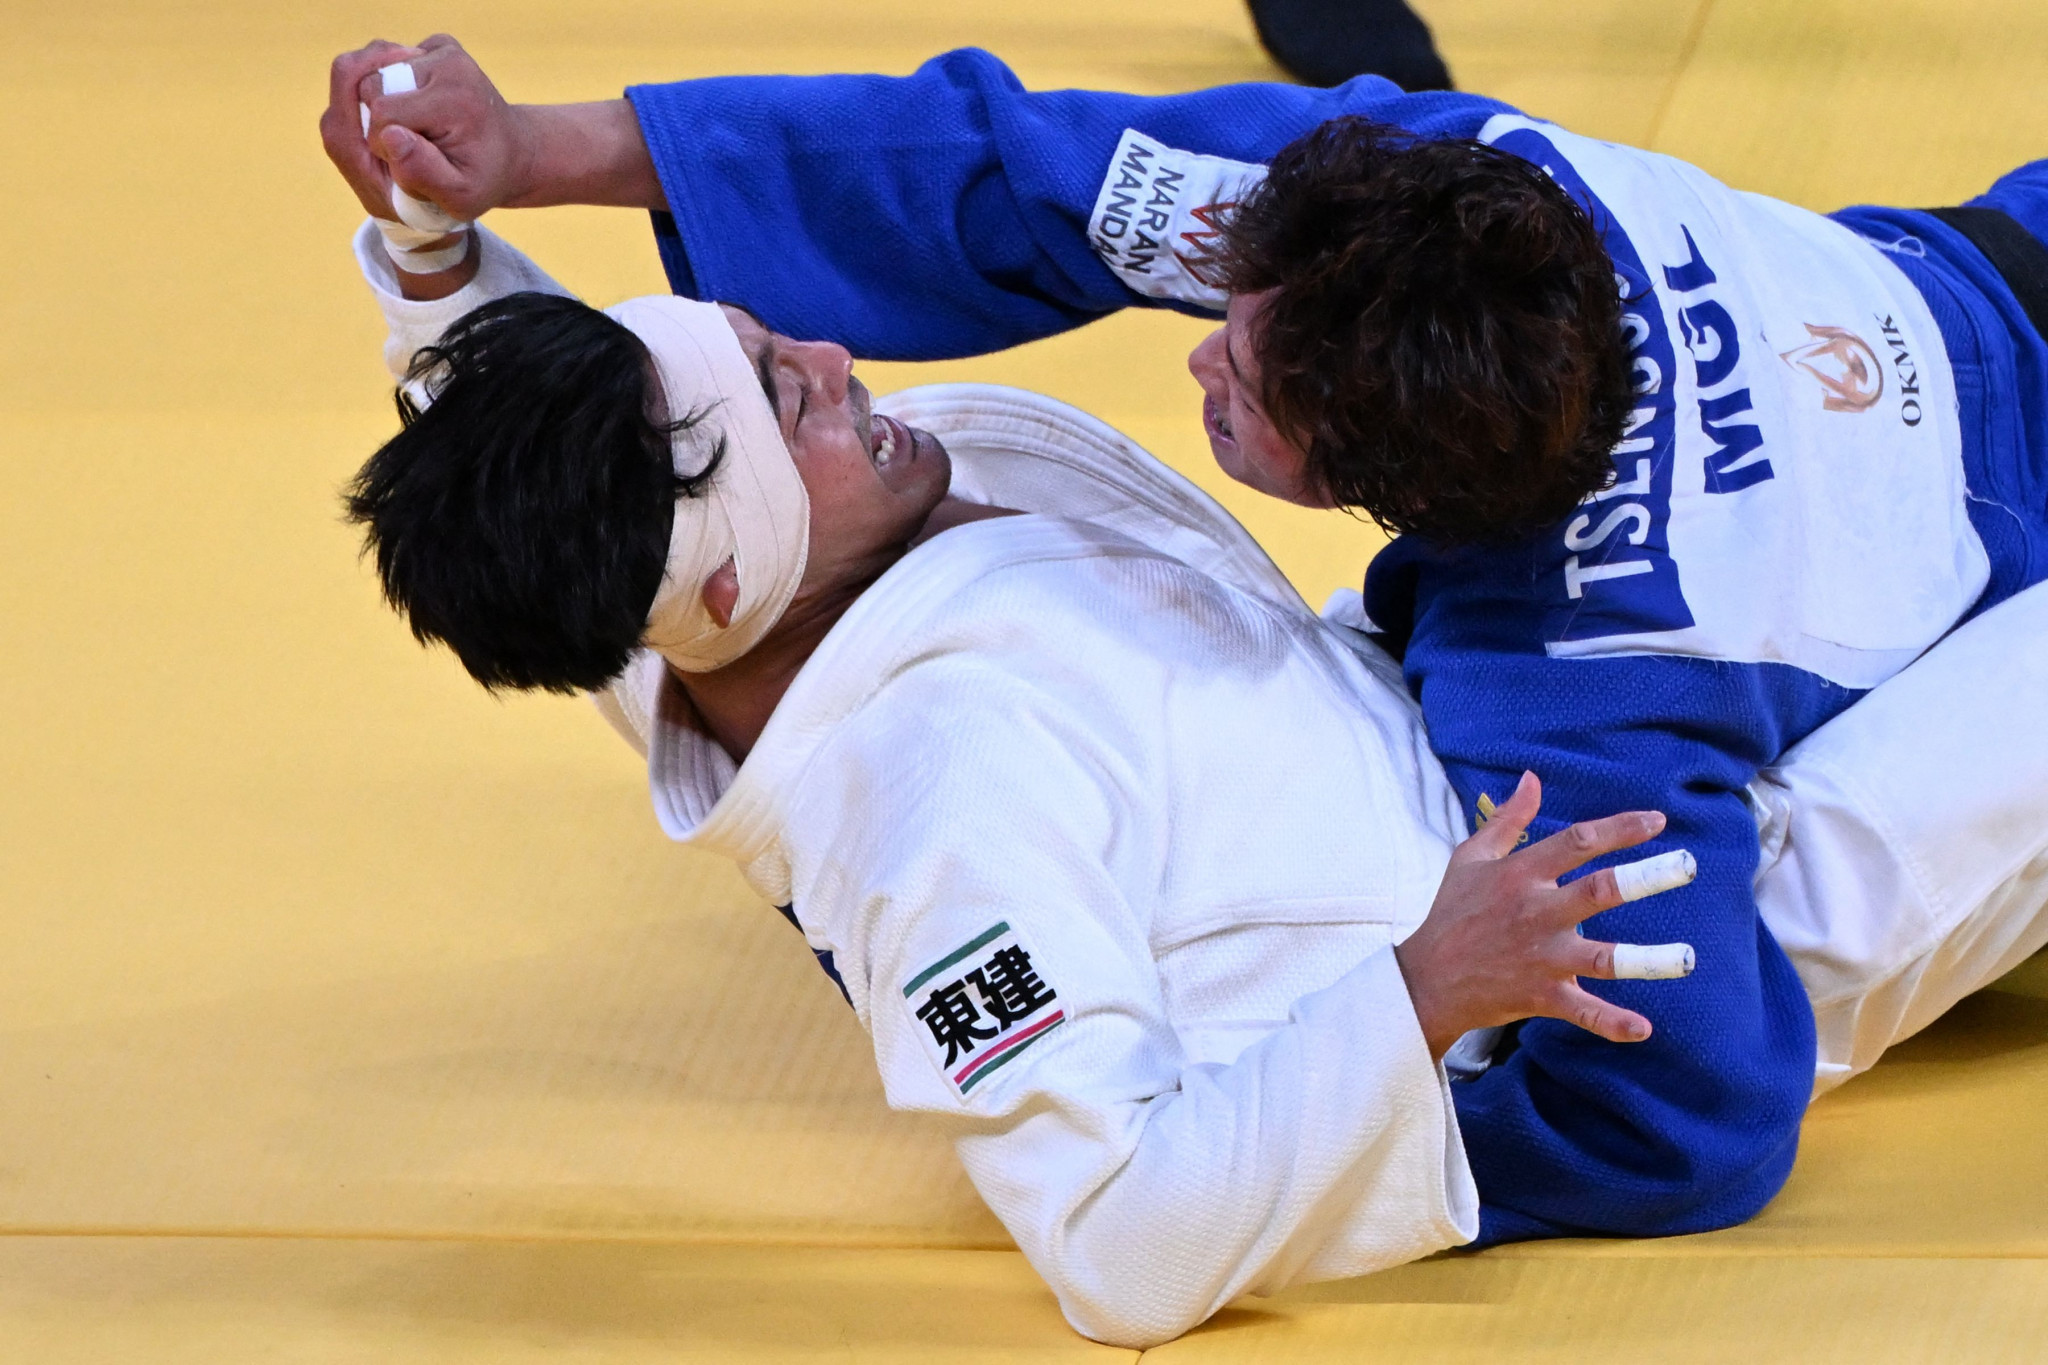 Tsogtbaatar snatched victory in the golden score round with a counter-attacking waza-ari ©Getty Images